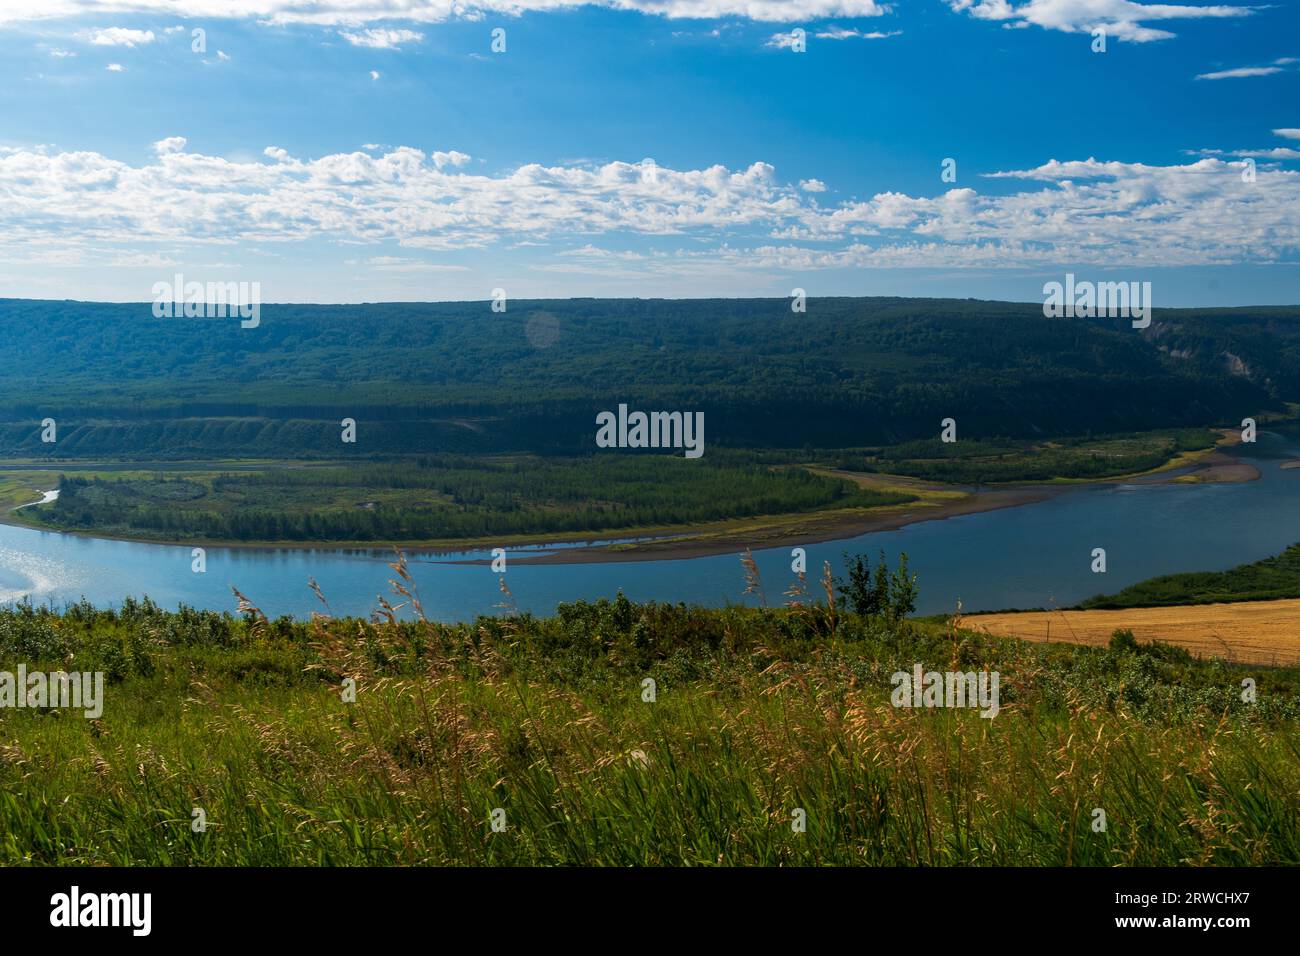 Peace River Valley, summer 2022, prior to completion of Site C Dam near Fort St. John, BC. Upon completion, area will be flooded. Stock Photo